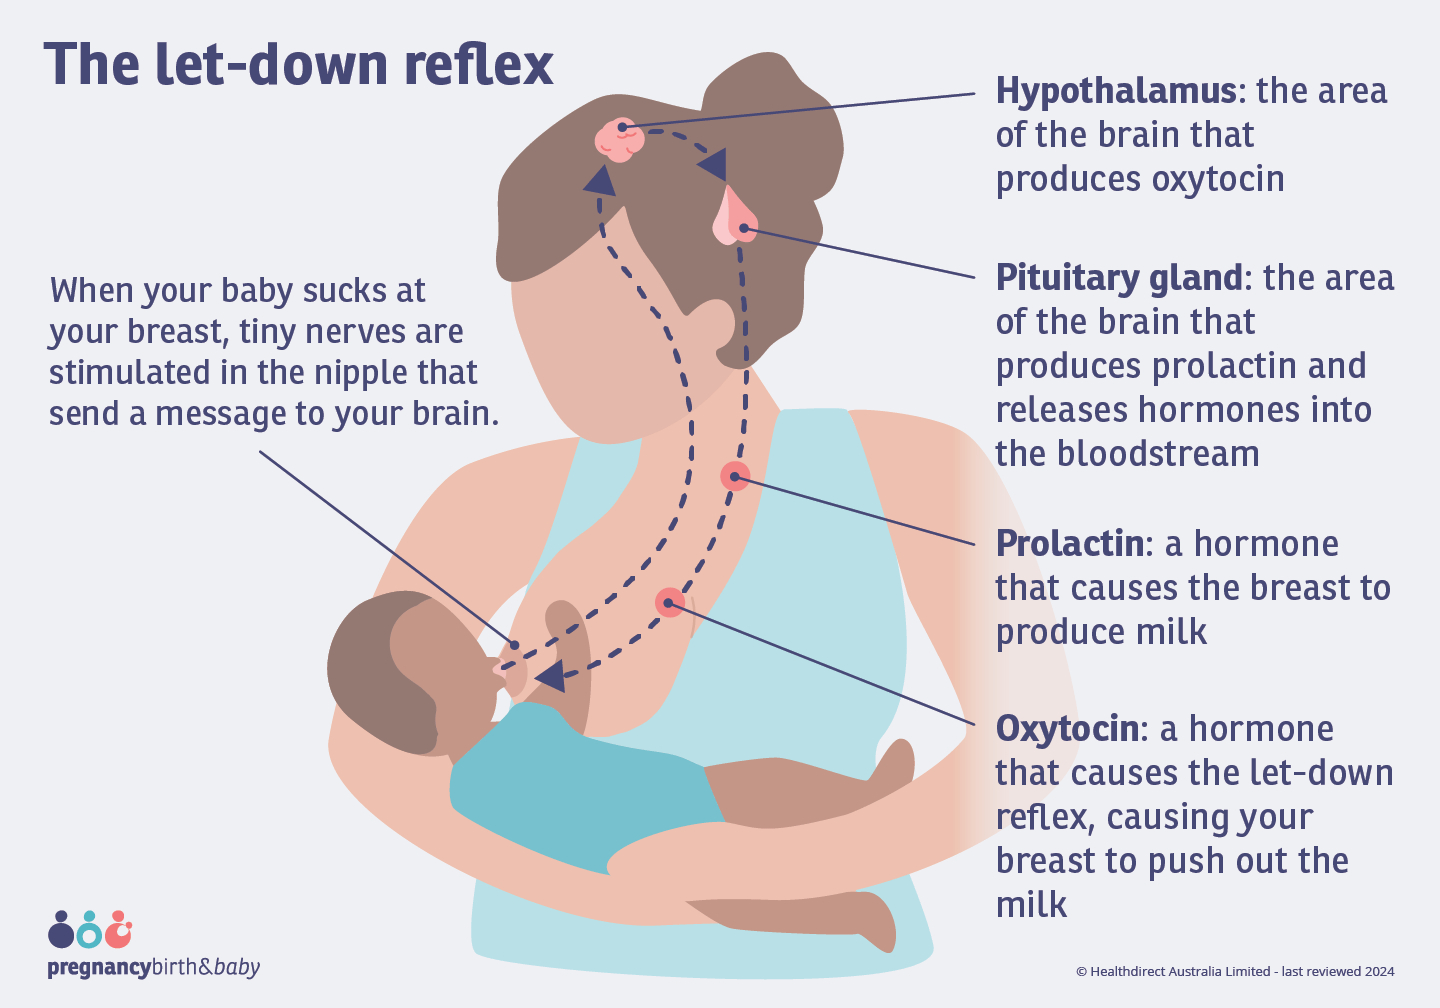 Illustration showing the flow of the let down reflex. Starting with the baby sucking the breast, which stimulates tiny nerves. This causes the brain to release hormones prolactin and oxytocin into your bloodstream.